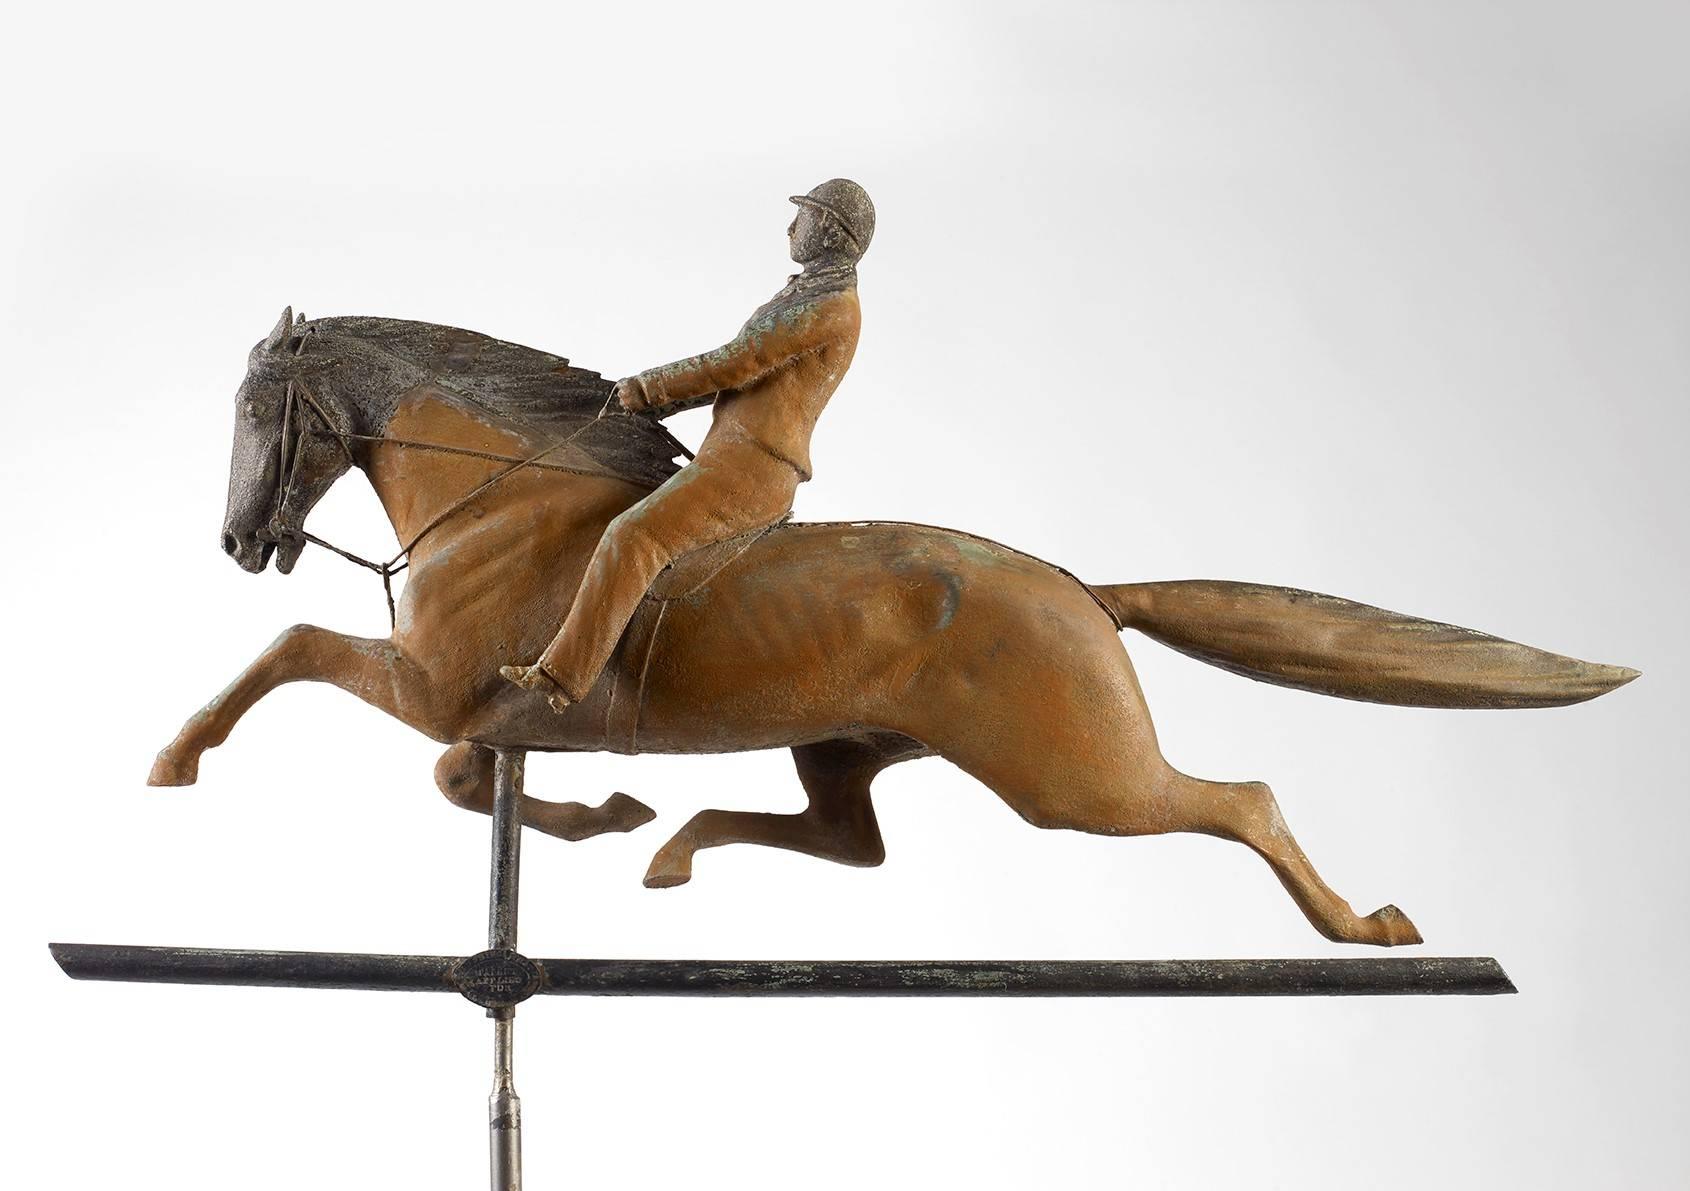 Dexter and jockey weathervane
Cushing & white, Waltham, Massachusetts, circa 1870
Retaining the original label “Cushing & White, Waltham, Mass./ Patent Applied For”
Molded copper, wire, and cast zinc with an old, weathered painted surface and